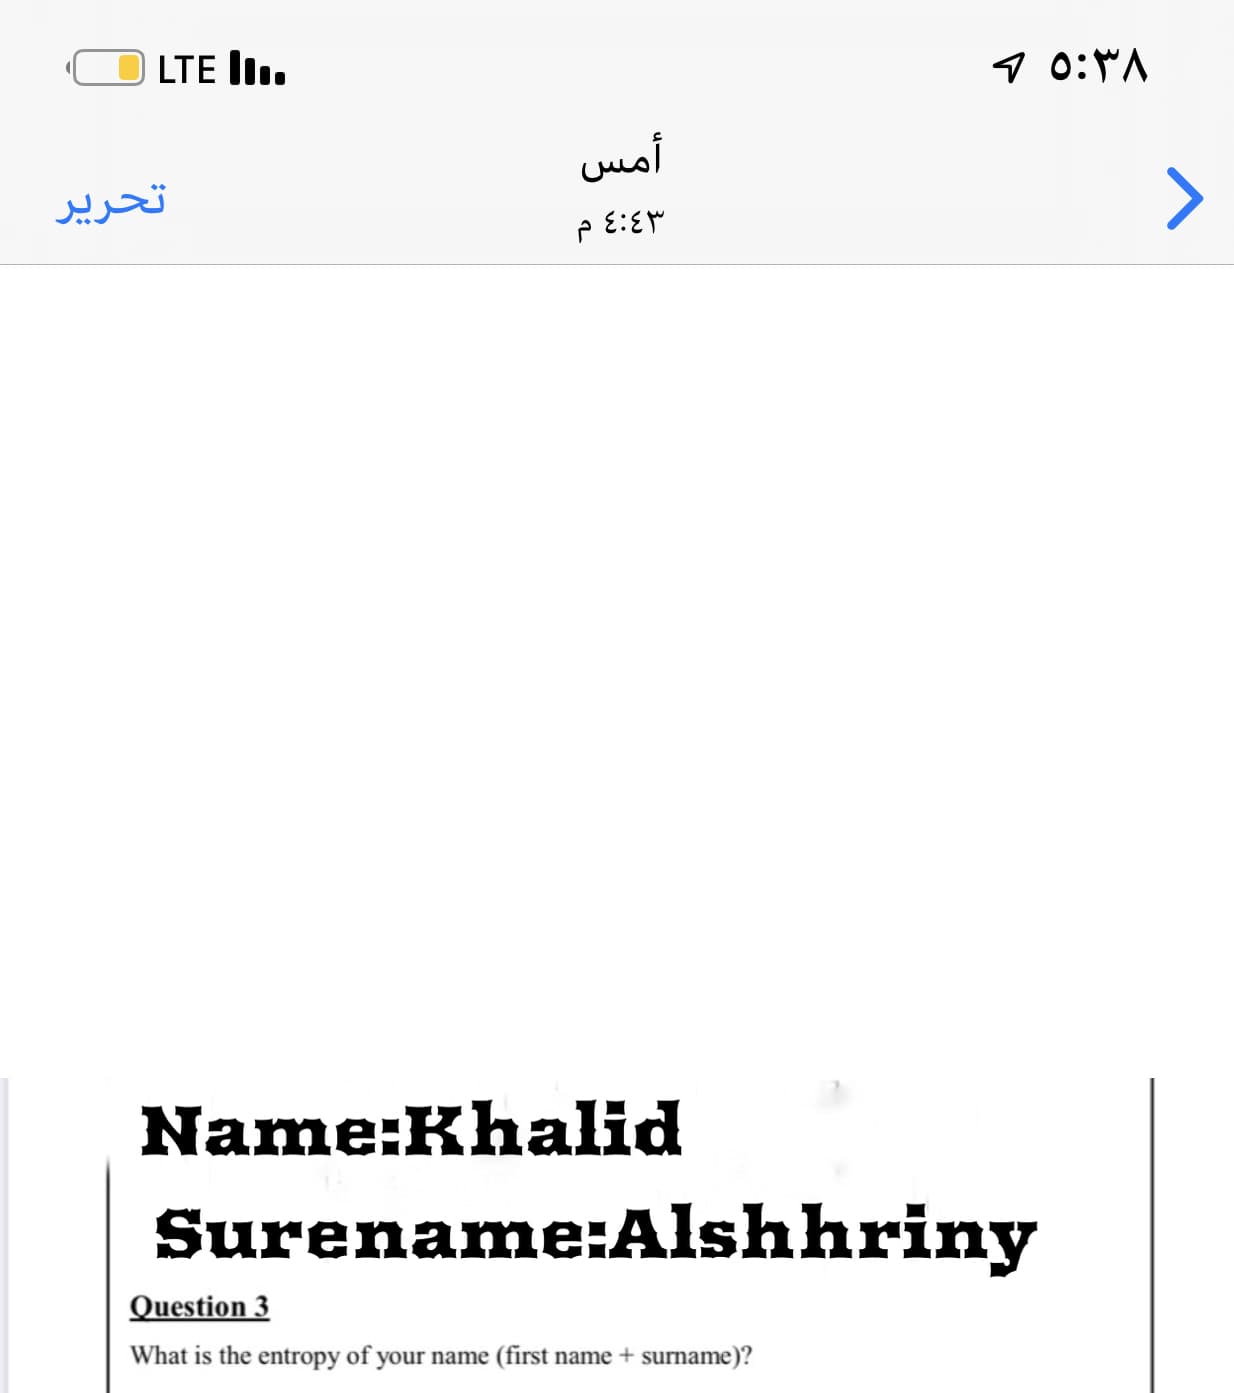 Name:Khalid
Surename:Alshhriny
Question 3
What is the entropy of your name (first name + surname)?
